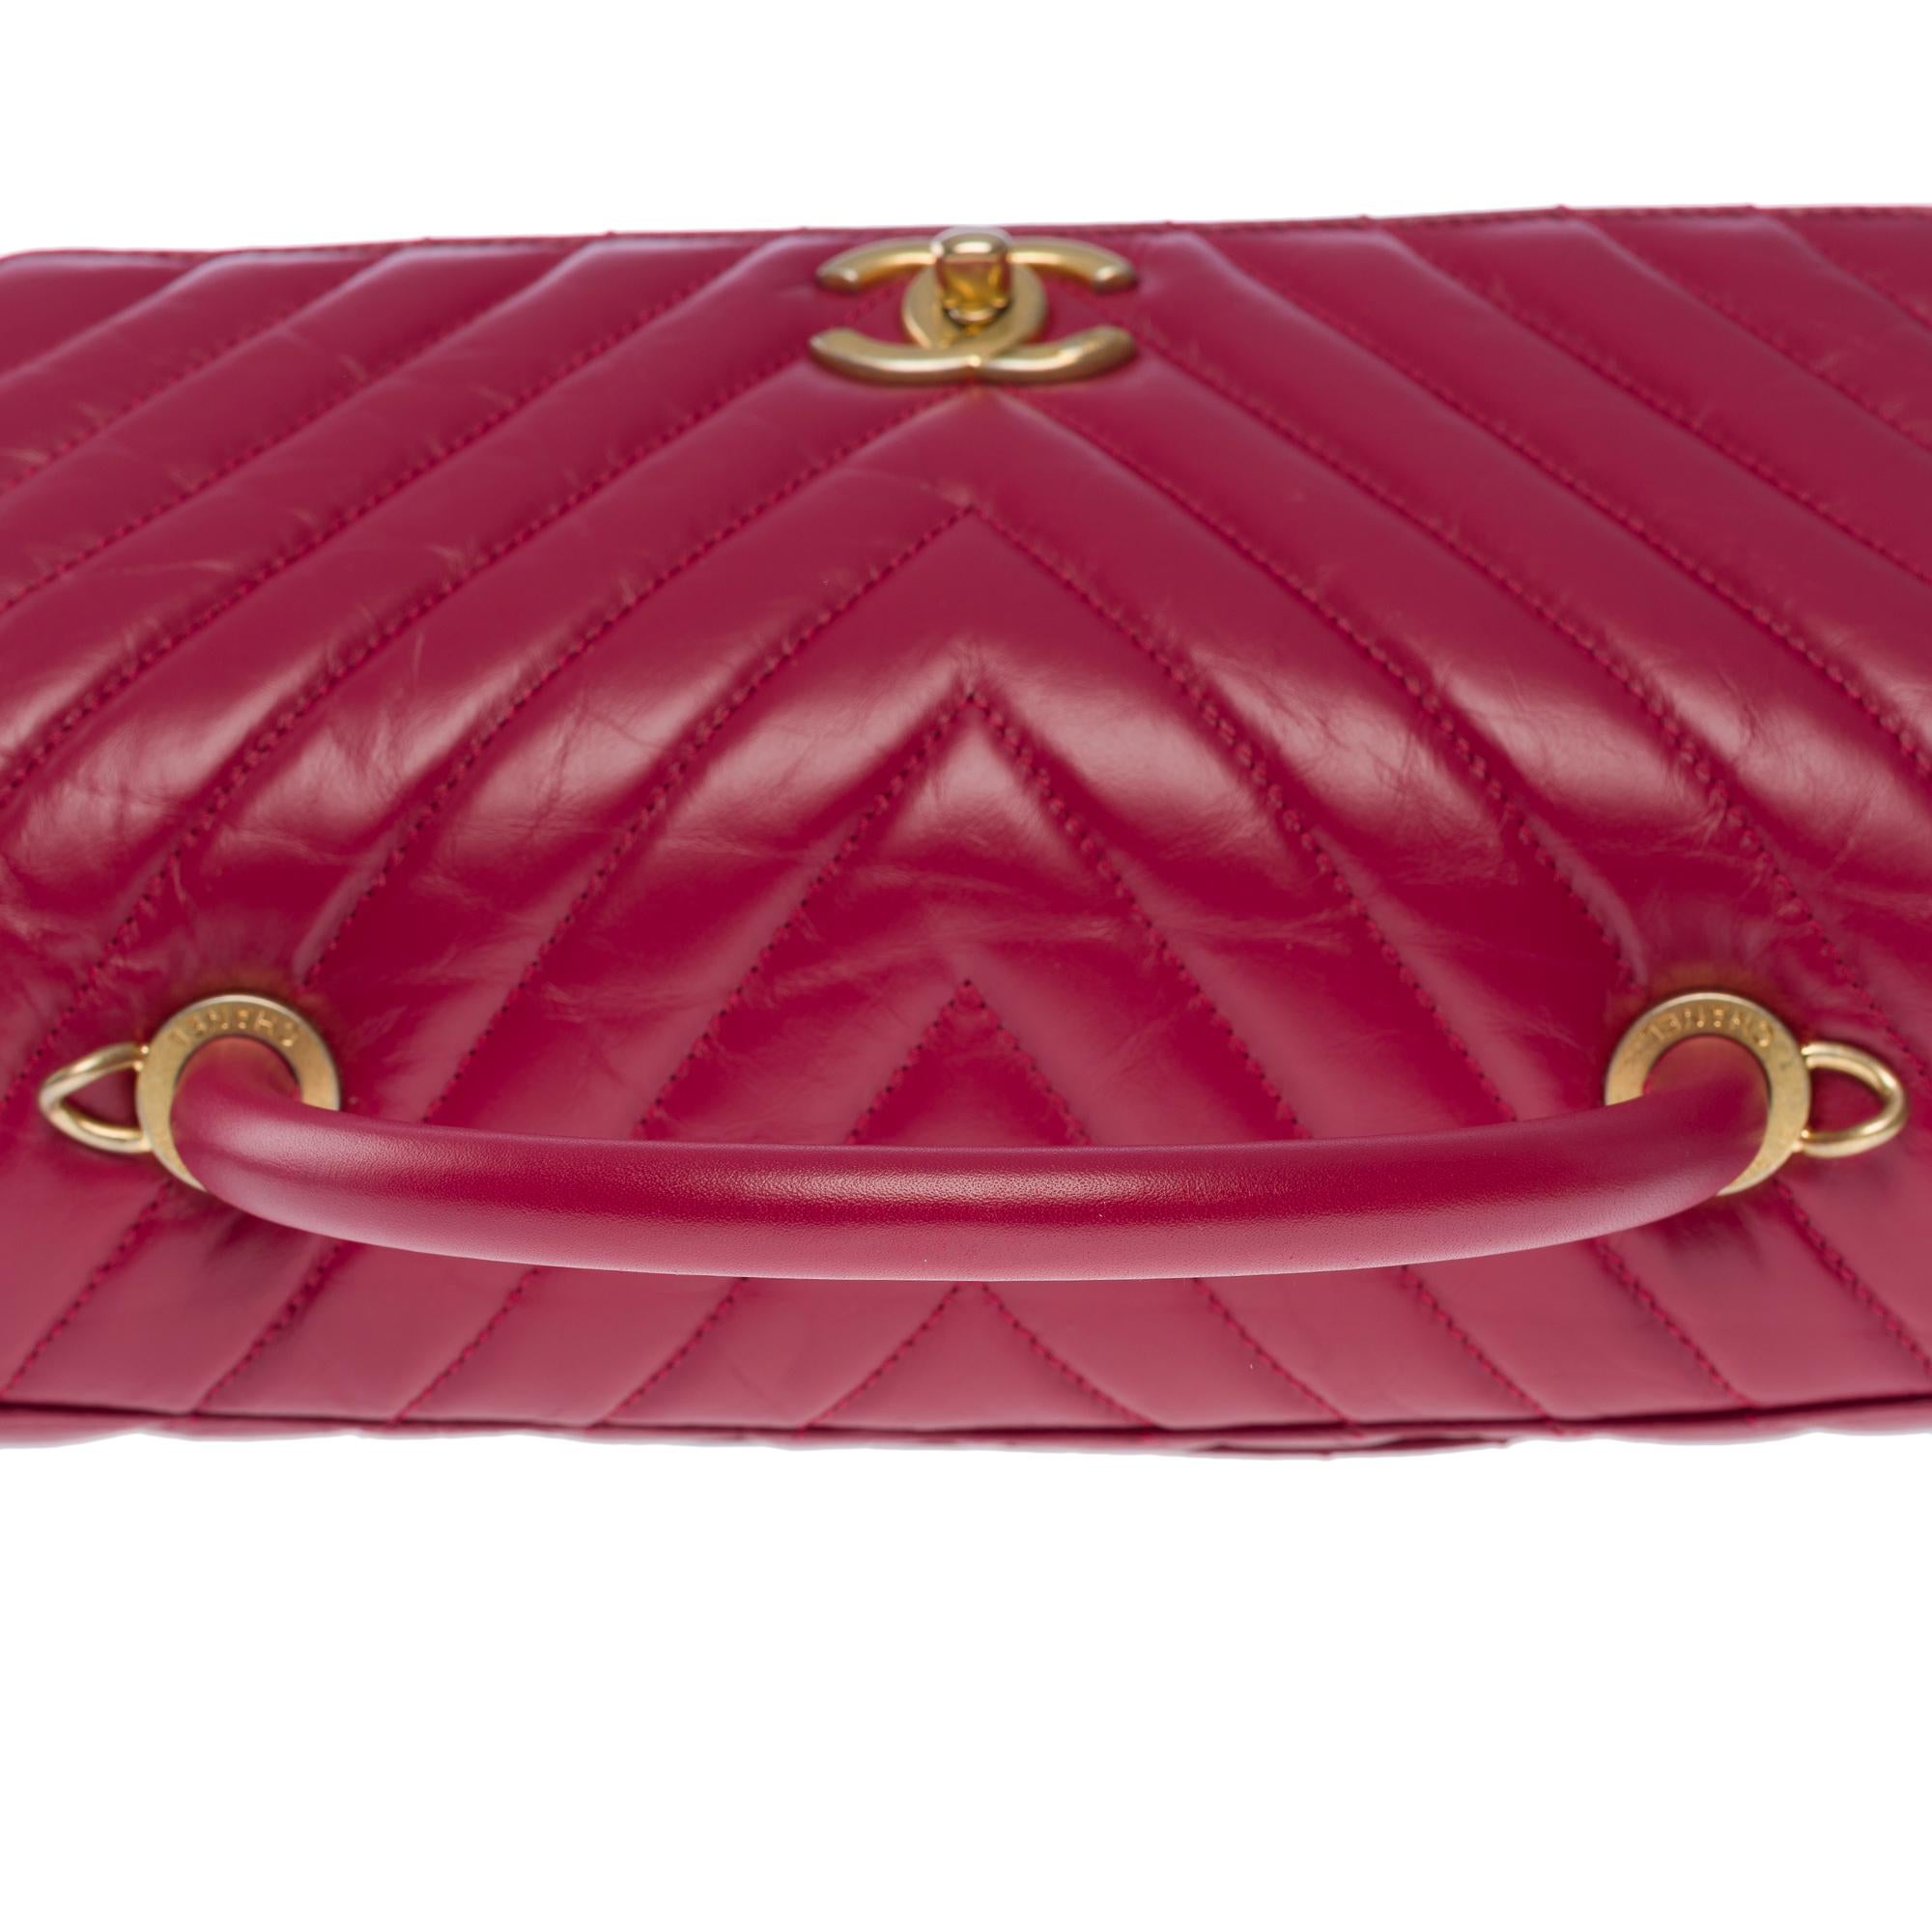 Amazing Chanel Coco handle handbag in Red lambskin leather, MGHW For Sale 6